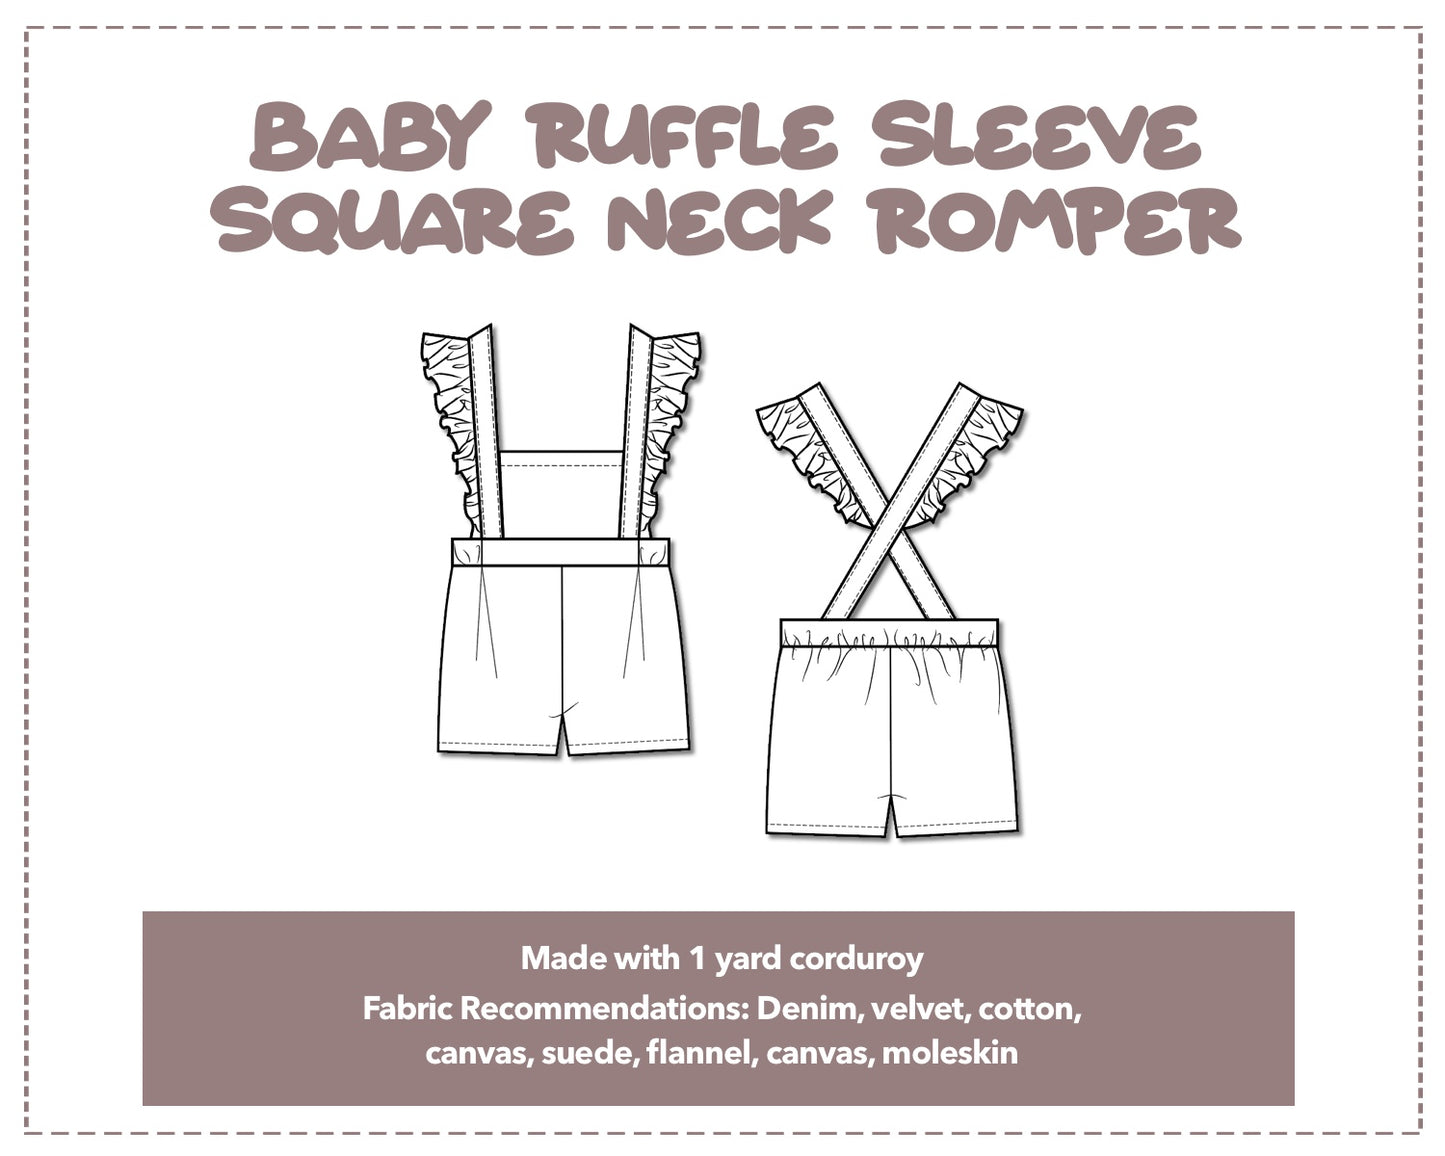 Illustration and detailed description for Baby Ruffle Sleeve Square Neck Romper  sewing pattern.